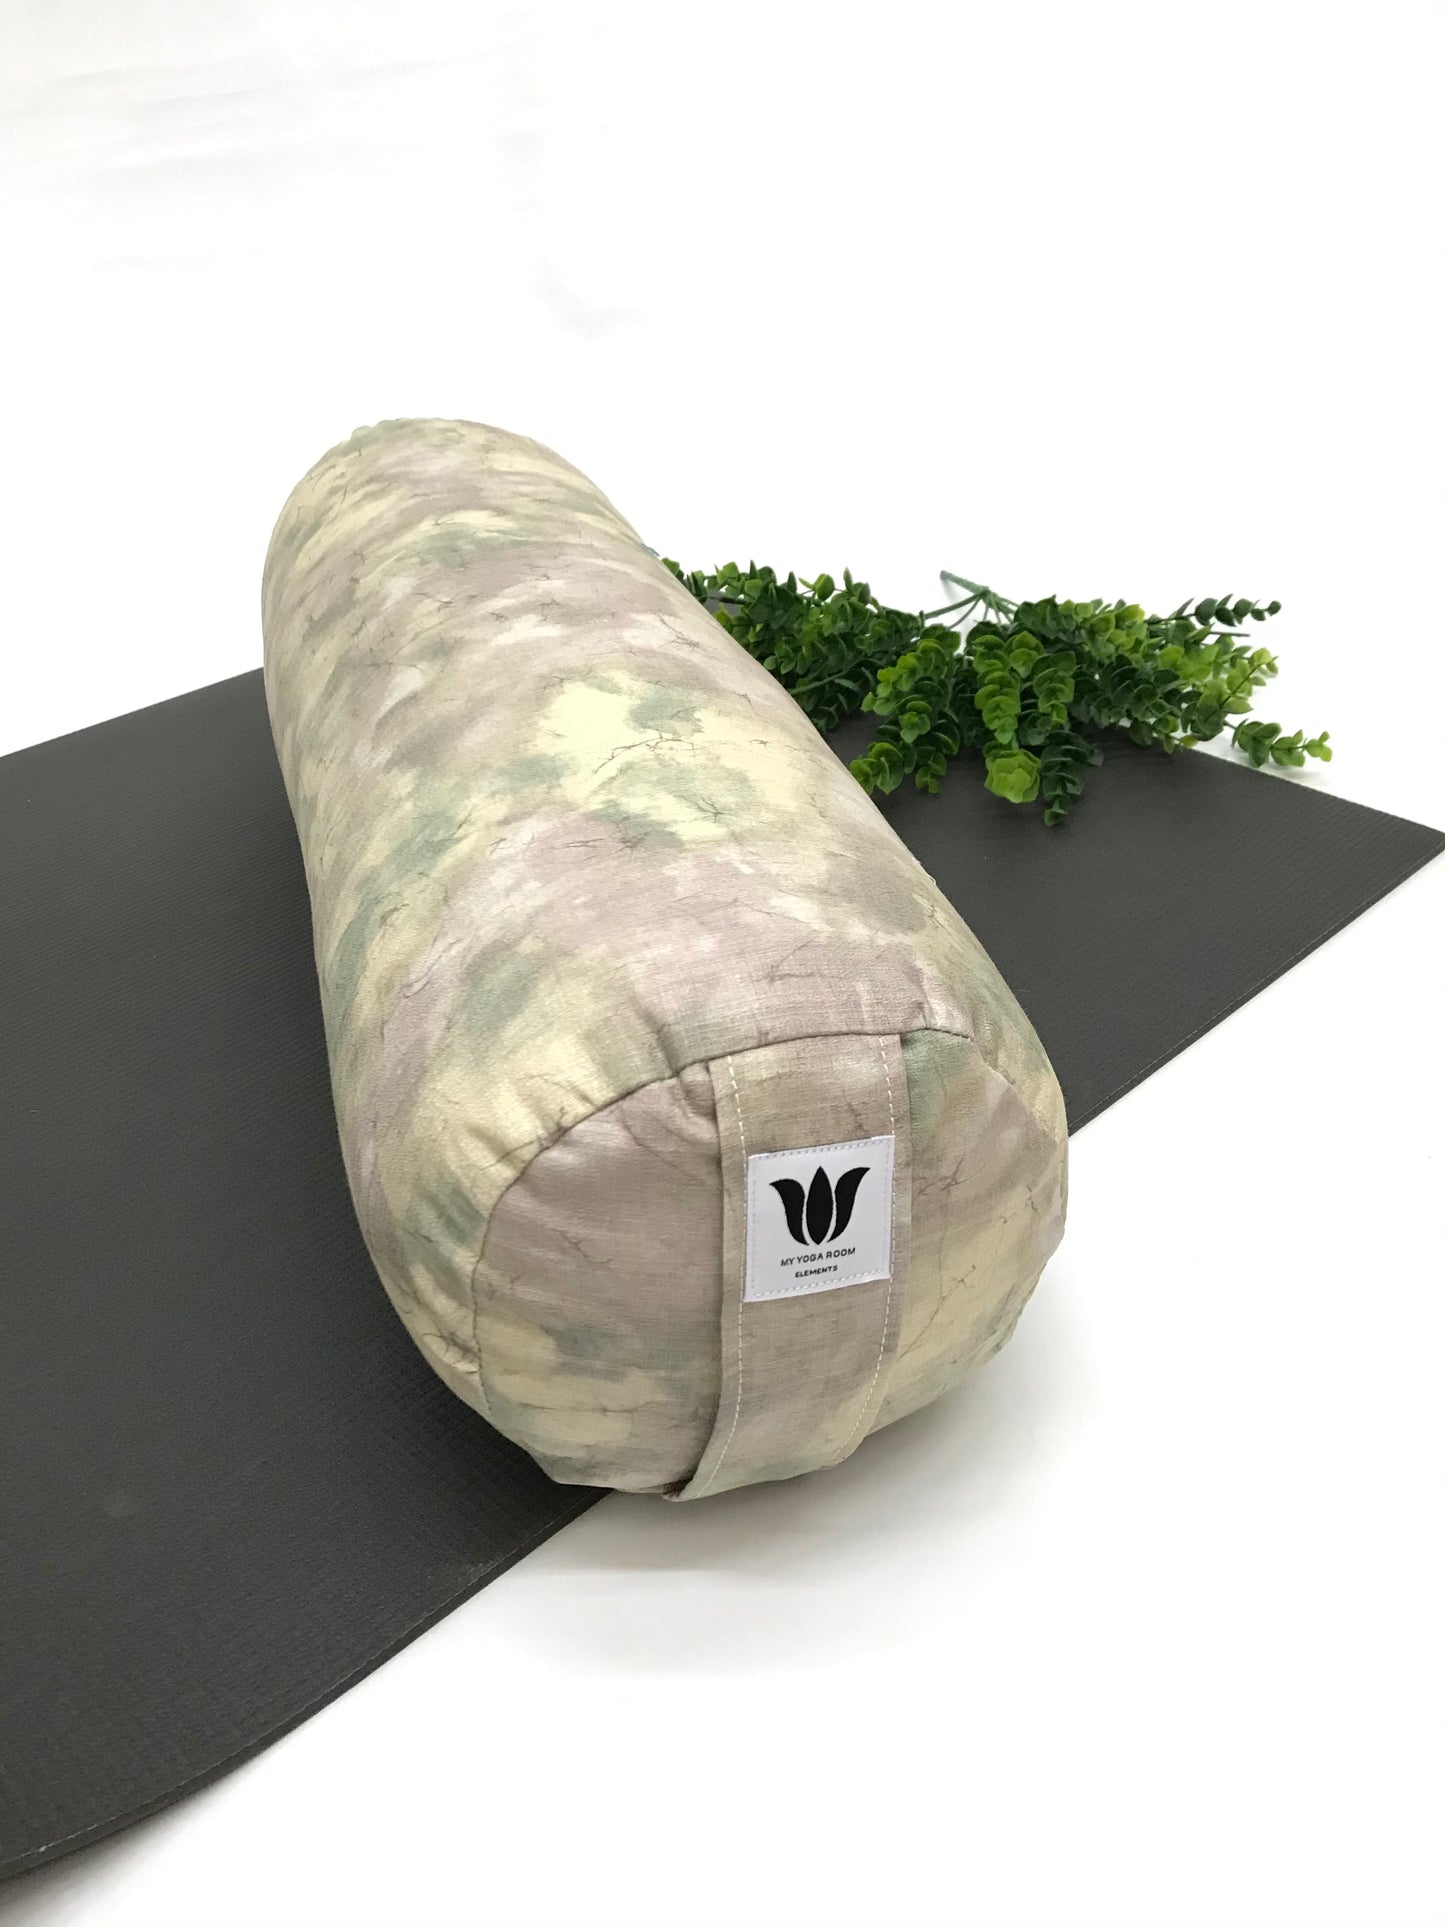 Round yoga bolster in durable poly cotton, in subtle purple marble print fabric. Allergy conscious fill with removeable cover. Made in Canada by My Yoga Room Elements